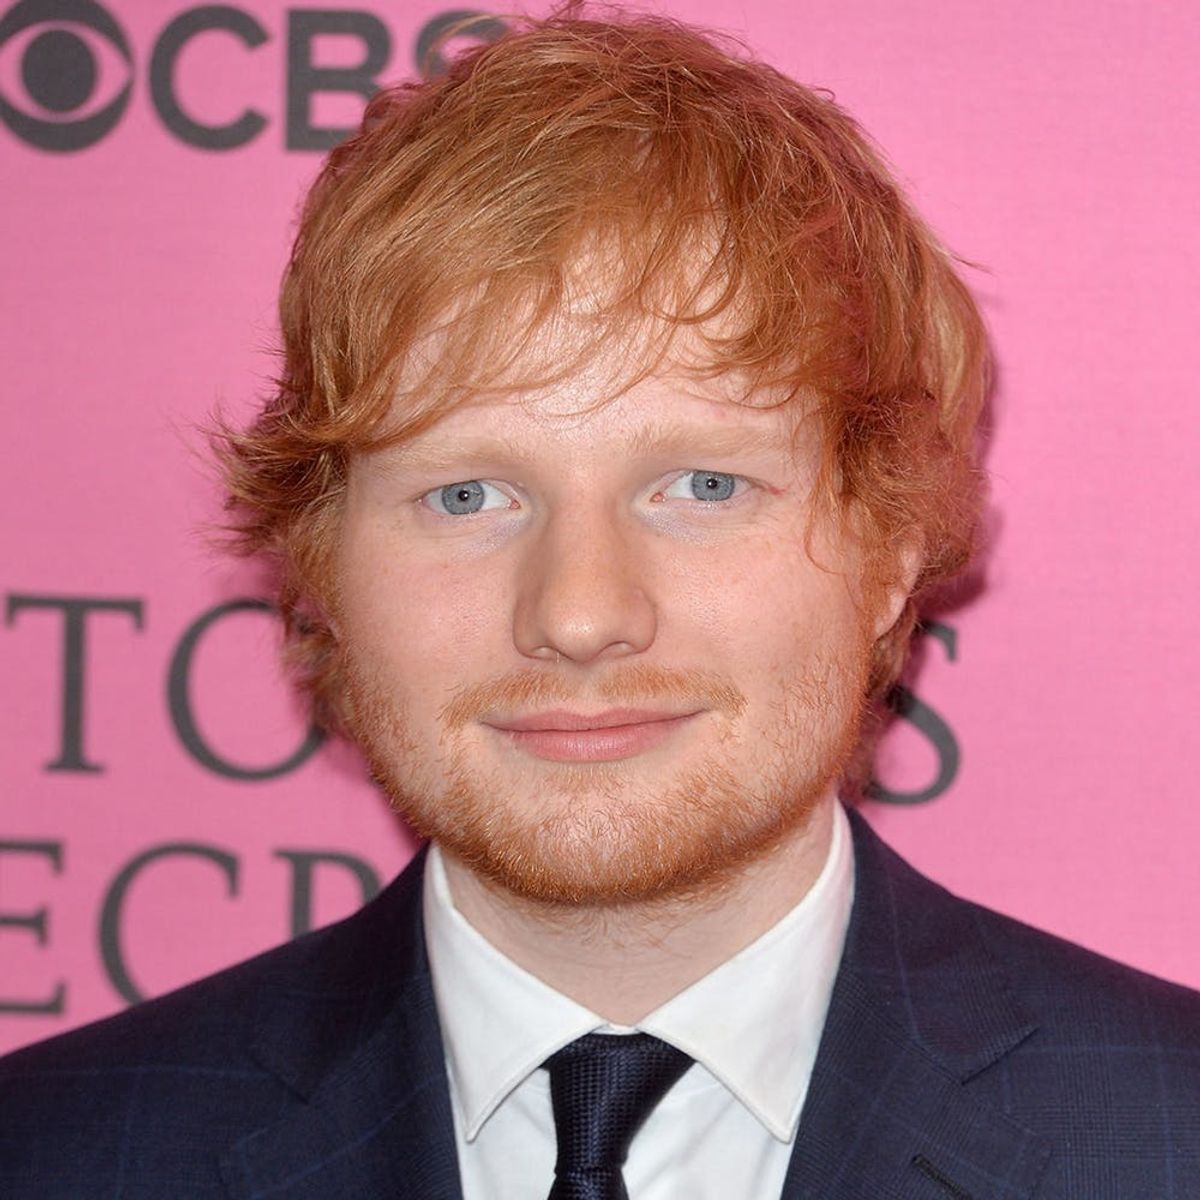 Ed Sheeran Just Helped His Friend Pull Off the Most Romantic Proposal